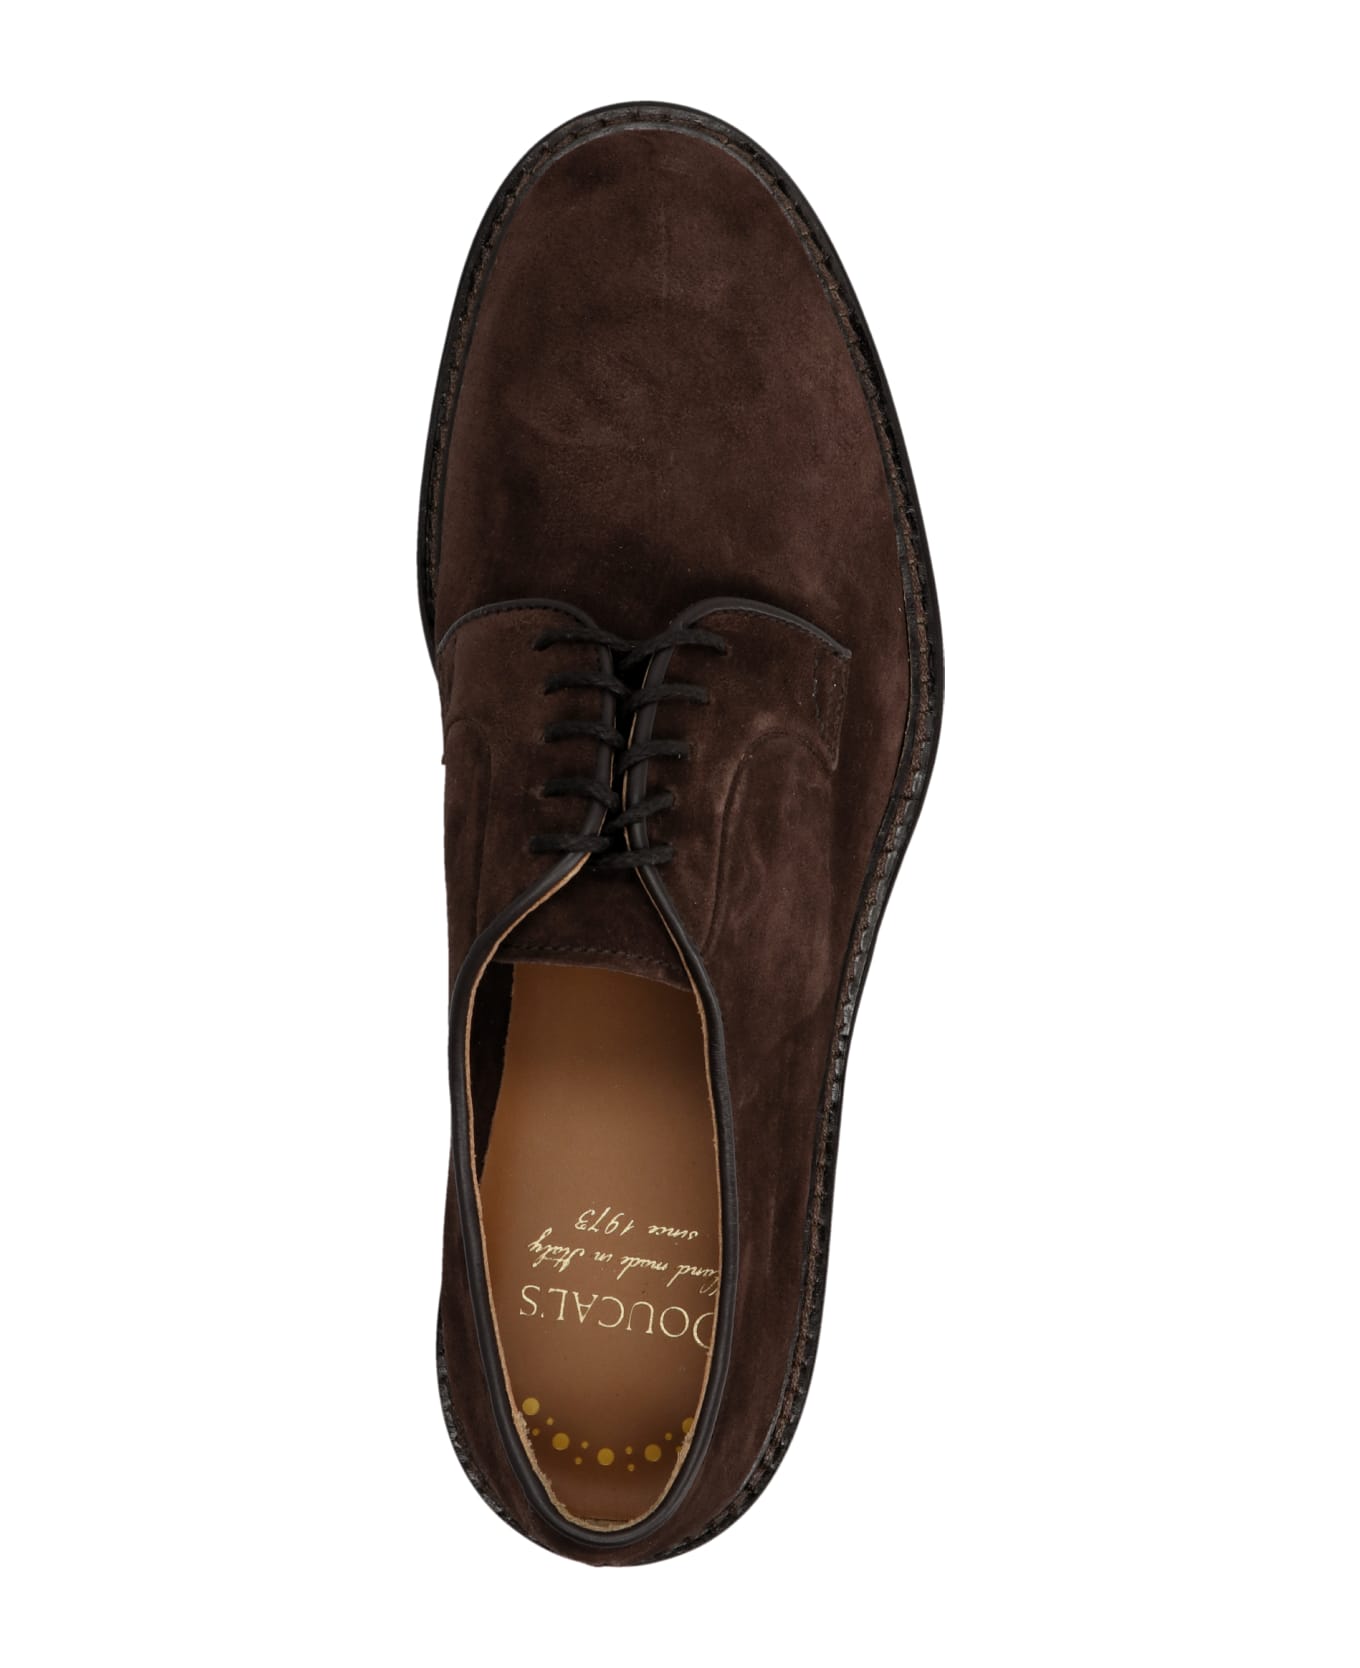 Doucal's Suede Derby Shoes - Brown